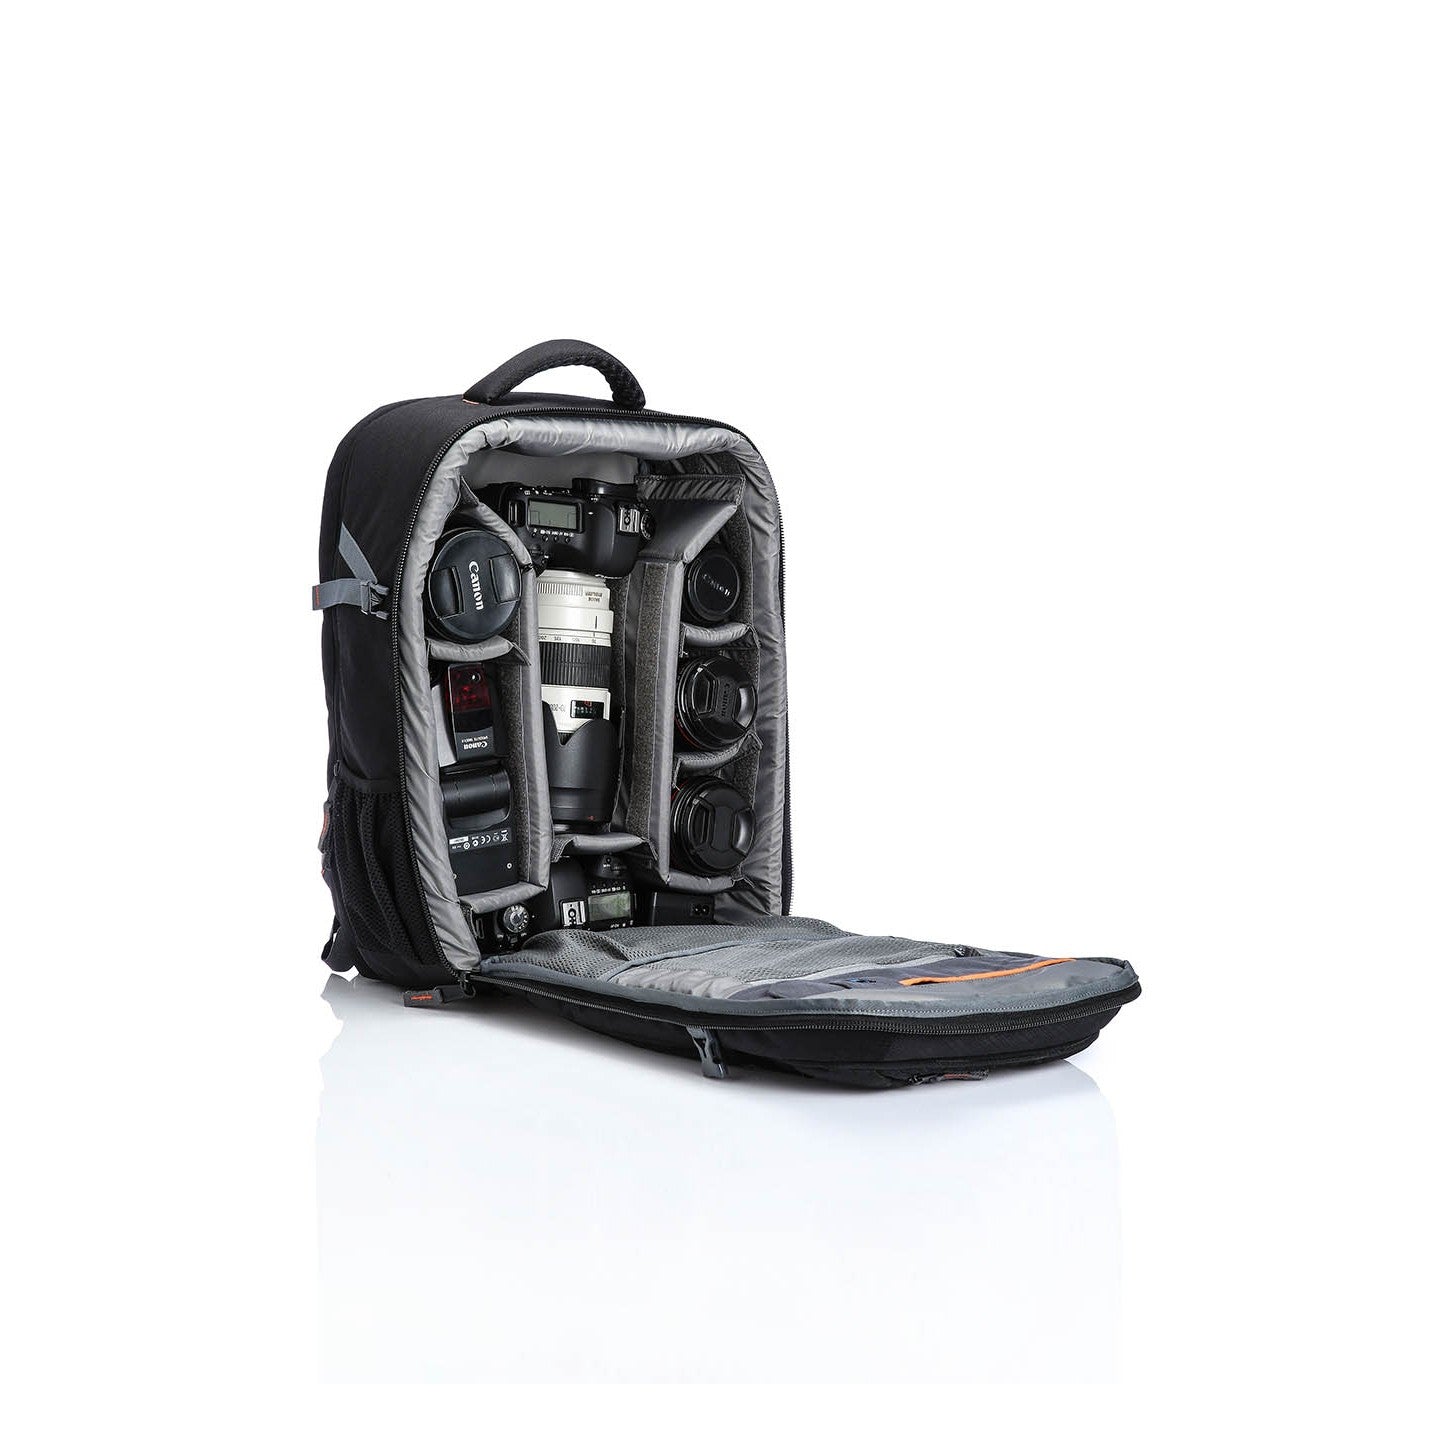 Image: Open view of the P41 Tribute DSLR camera bag, revealing its spacious compartments filled with camera equipment and accessories. The bag's customizable dividers and dedicated storage areas ensure secure organization and easy access to your gear. Stay prepared and ready to capture amazing shots with the P41 Tribute."